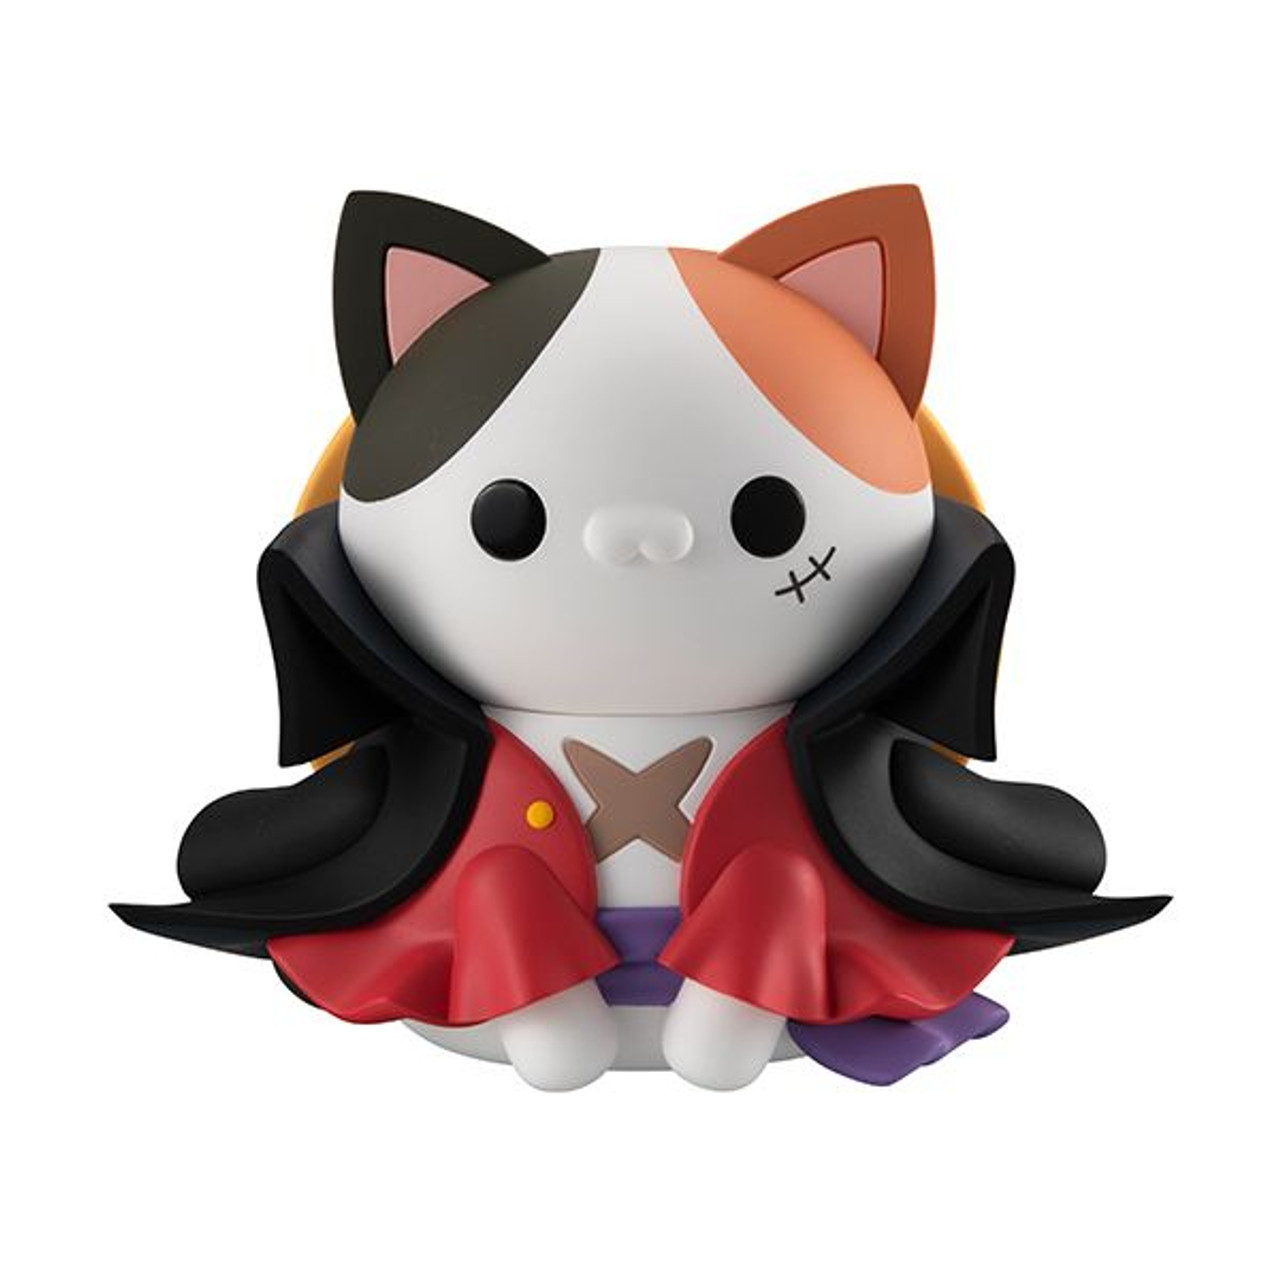 Mega Cat Project One Piece NyanPiece Nyan! Ver. Luffy with Rivals